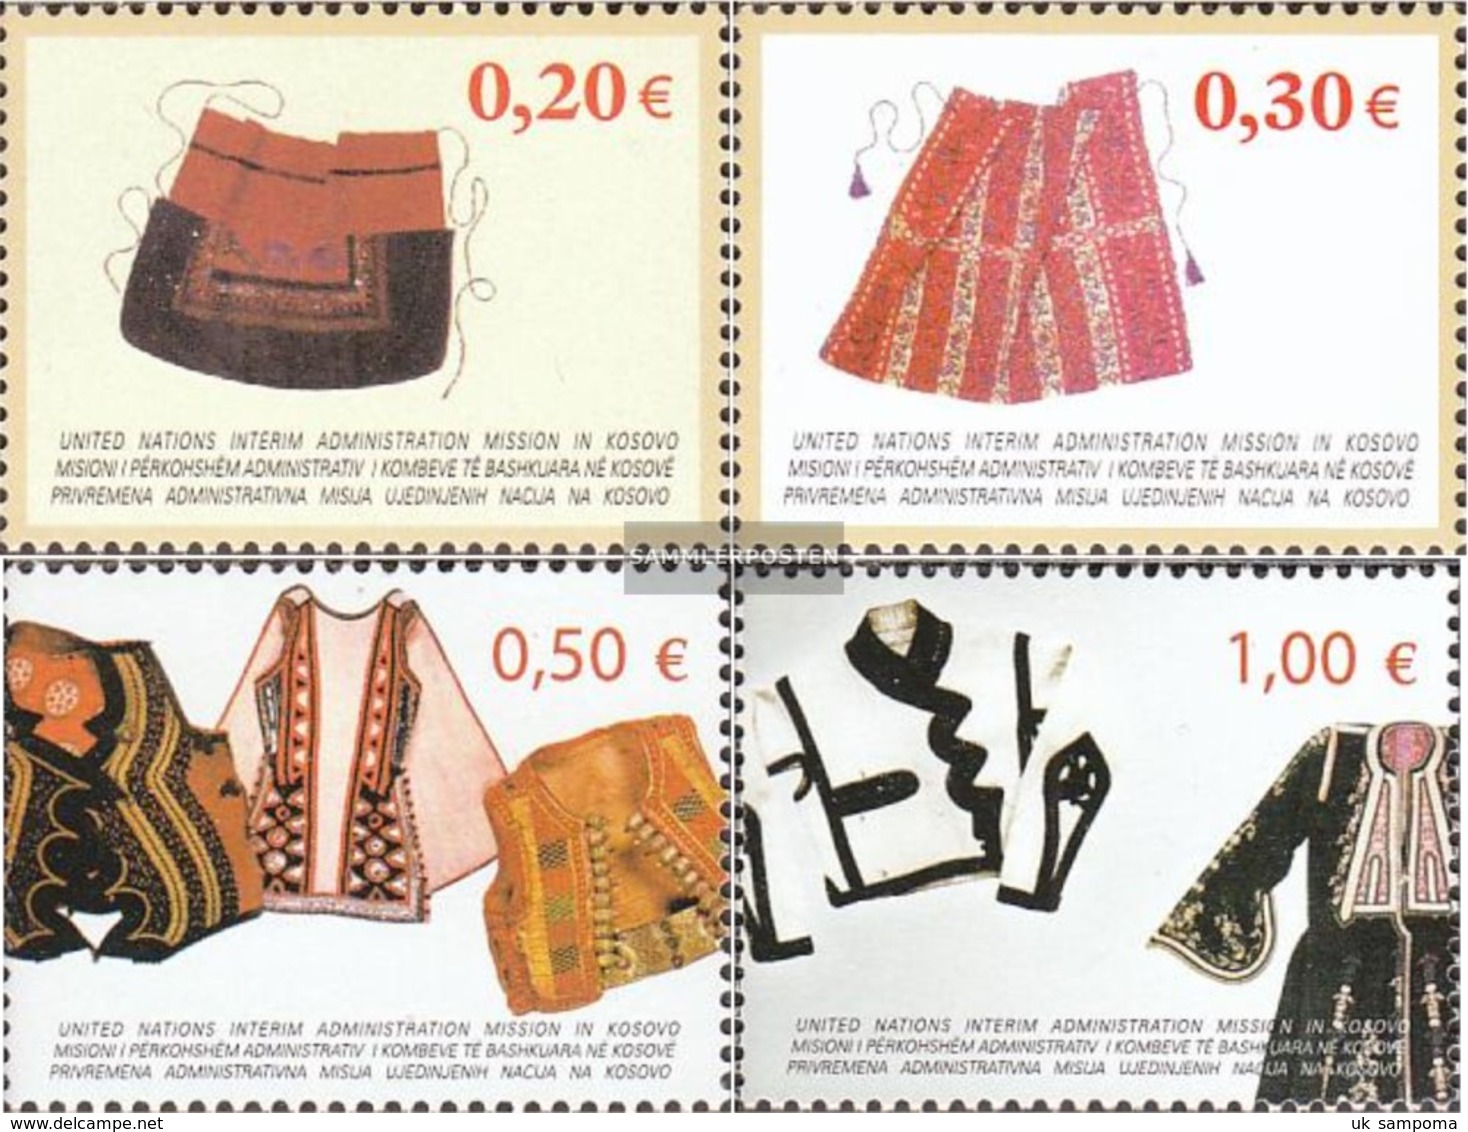 Kosovo 22-25 (complete Issue) Unmounted Mint / Never Hinged 2004 Costumes - Neufs